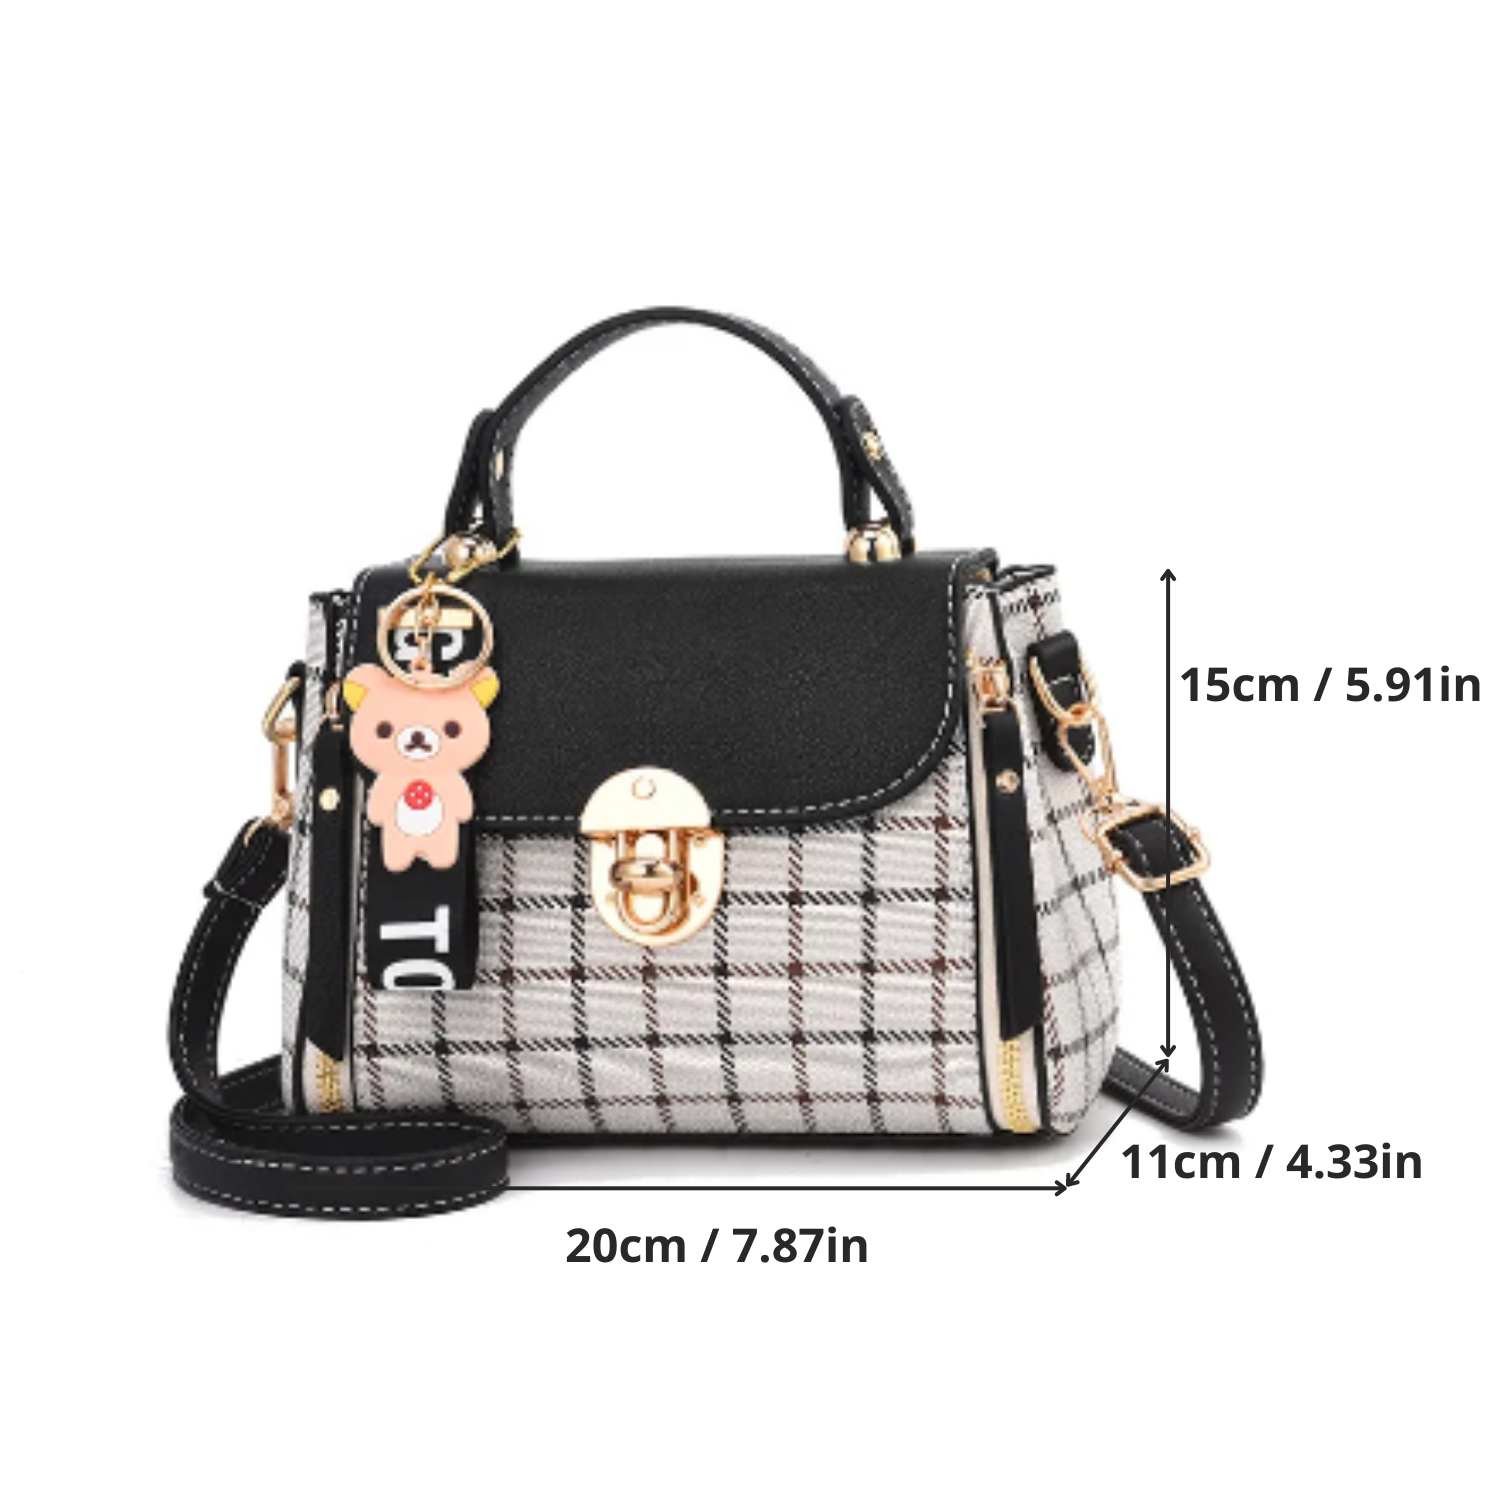 Chic Plaid Pattern Handbag with Charm Accents